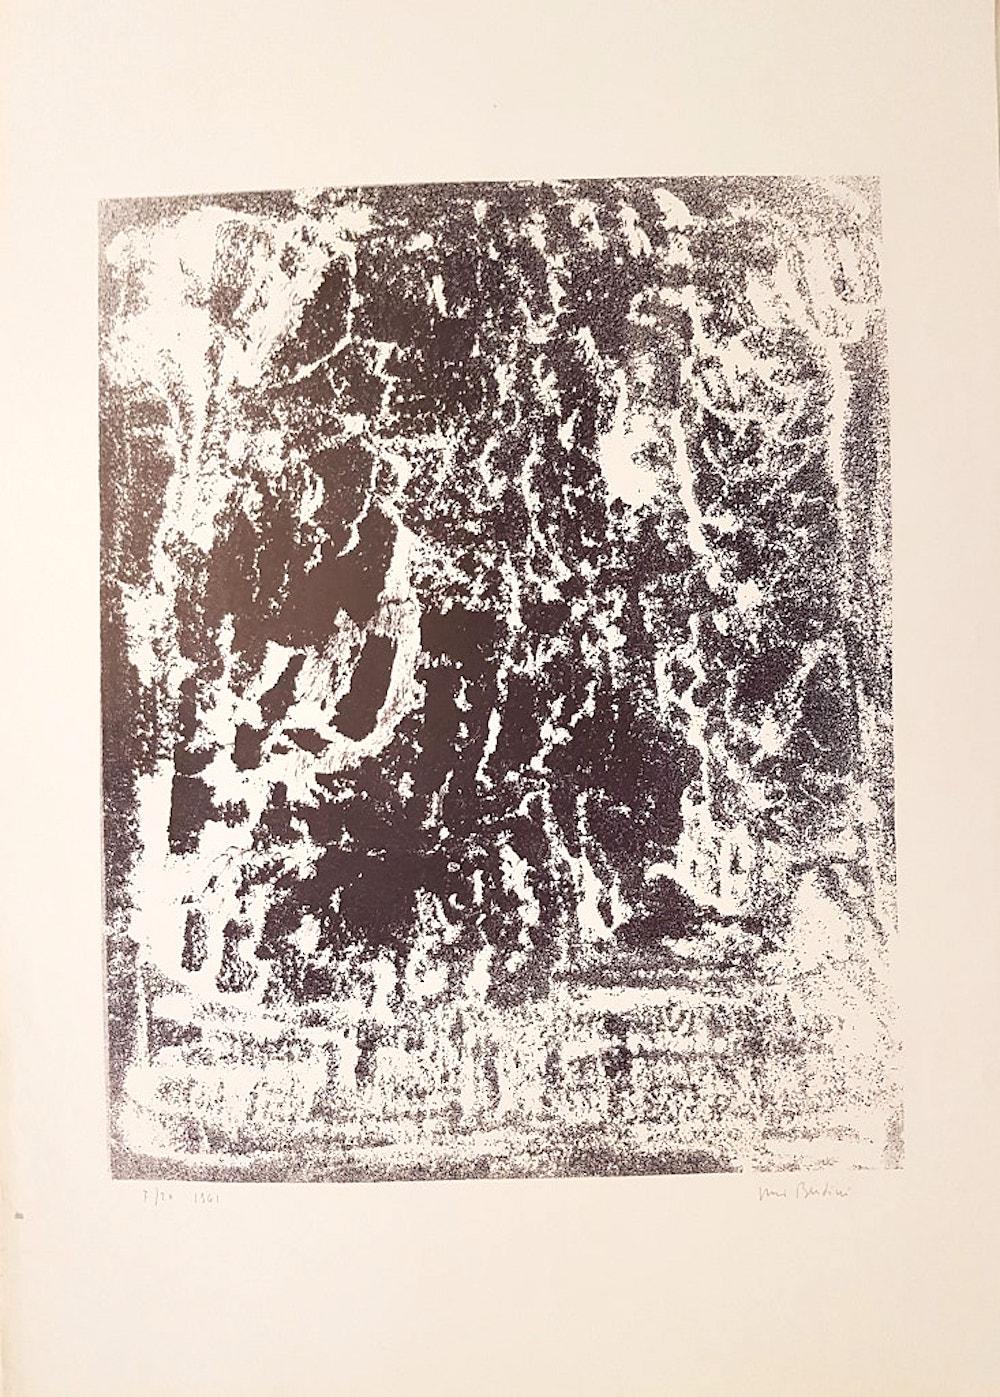 Image dimensions: 49 x 38 cm.

Interesting b/w lithograph representing a abstract composition. Dated, numbered and hand-signed with pencil on lower margin by the Italian artist, Vasco Bendini. Edition of 20 prints. 

In very good condition. 